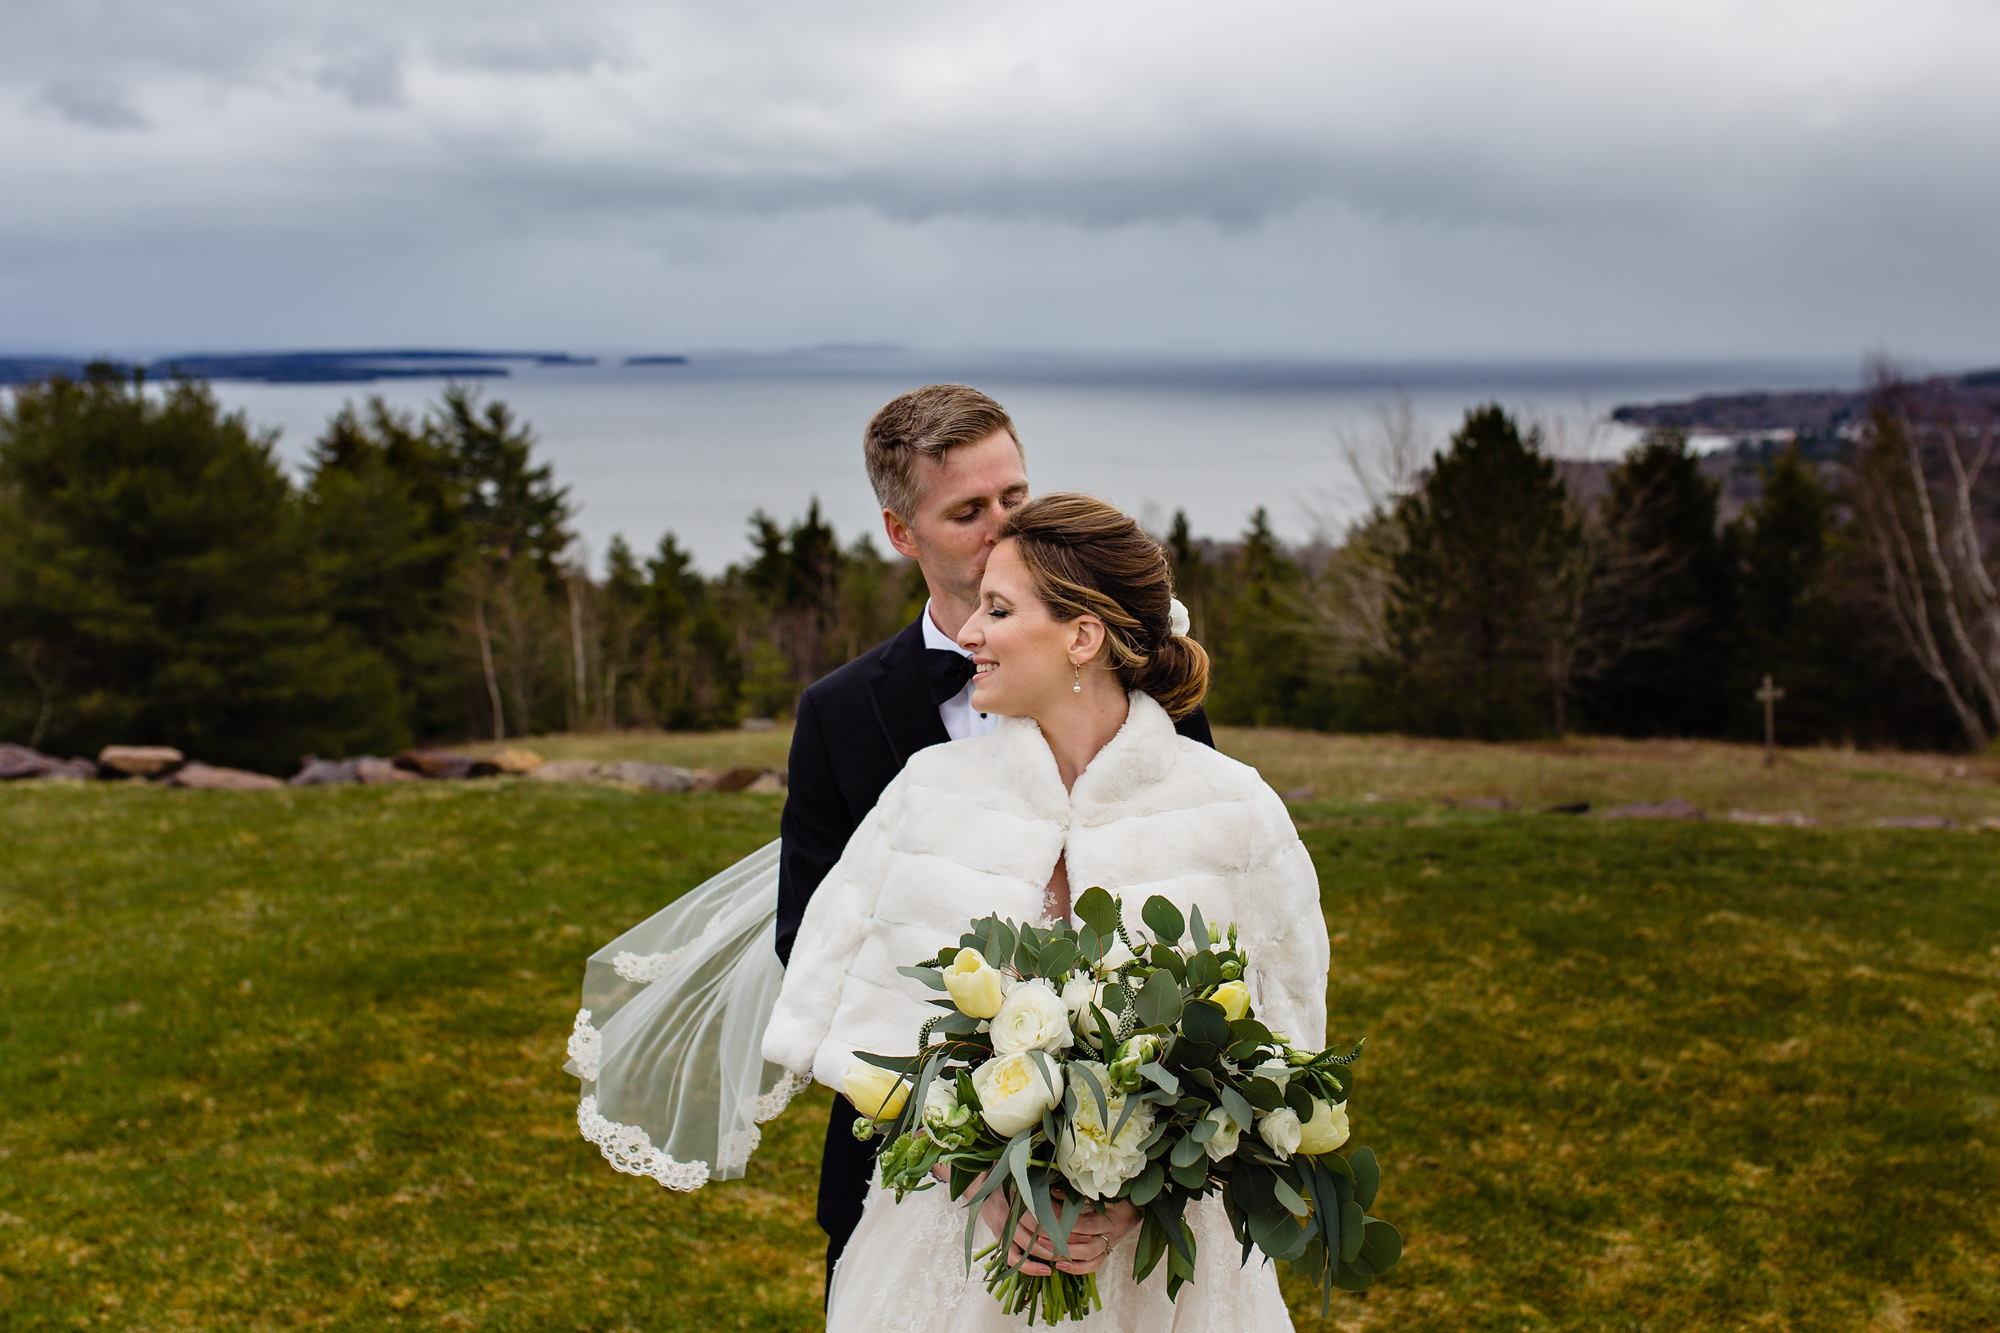 Wedding portraits taken at Point Lookout in Northport, Maine